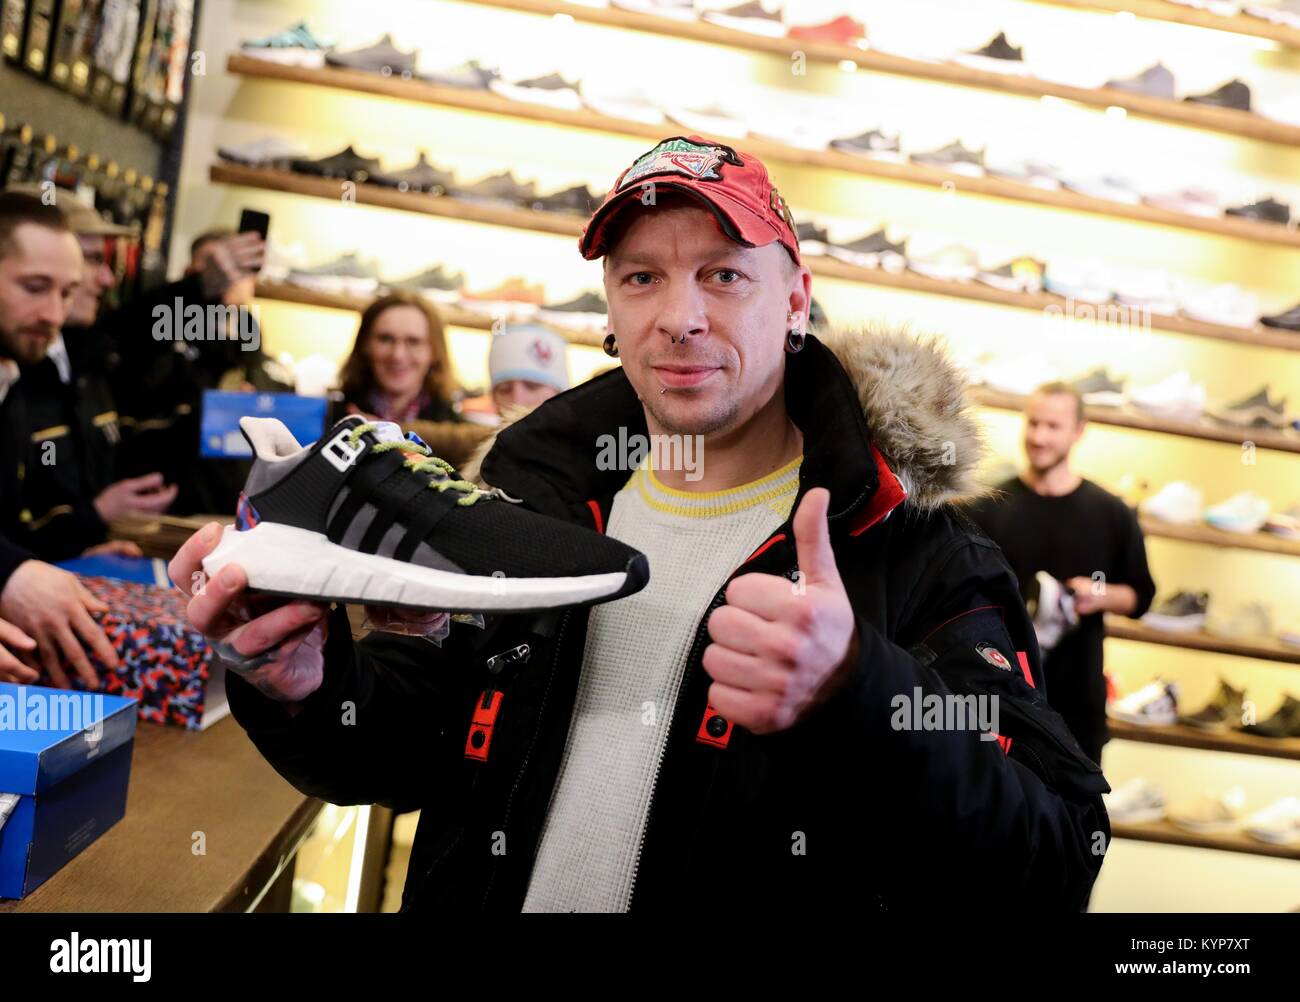 Berlin, Germany. 16th Jan, 2018. Steven Fischer shows off his new Adidas  sneakers with a built-in BVG (Berlin Transport Corporation) annual ticket  as the first buyer, in Berlin, Germany, 16 January 2018.